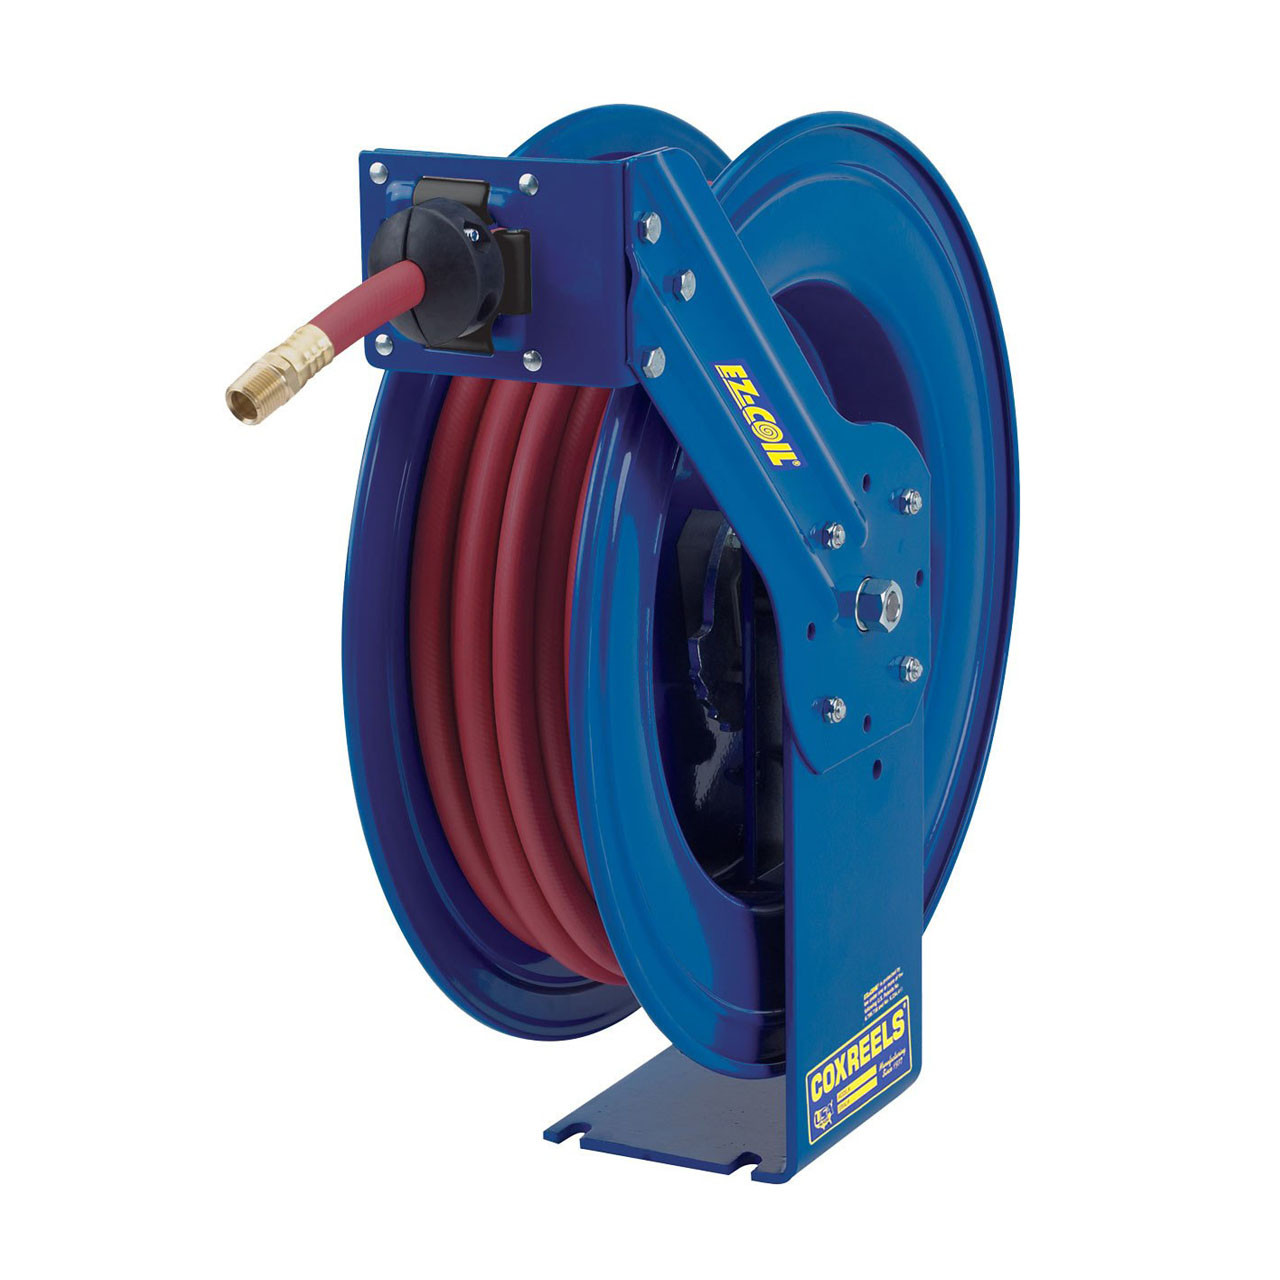 Cox Reels EZ-Coil hose reel for High Pressure Grease hose 3/8 inch X 75 Feet  4000 PSI (SAE 100R16) hose included